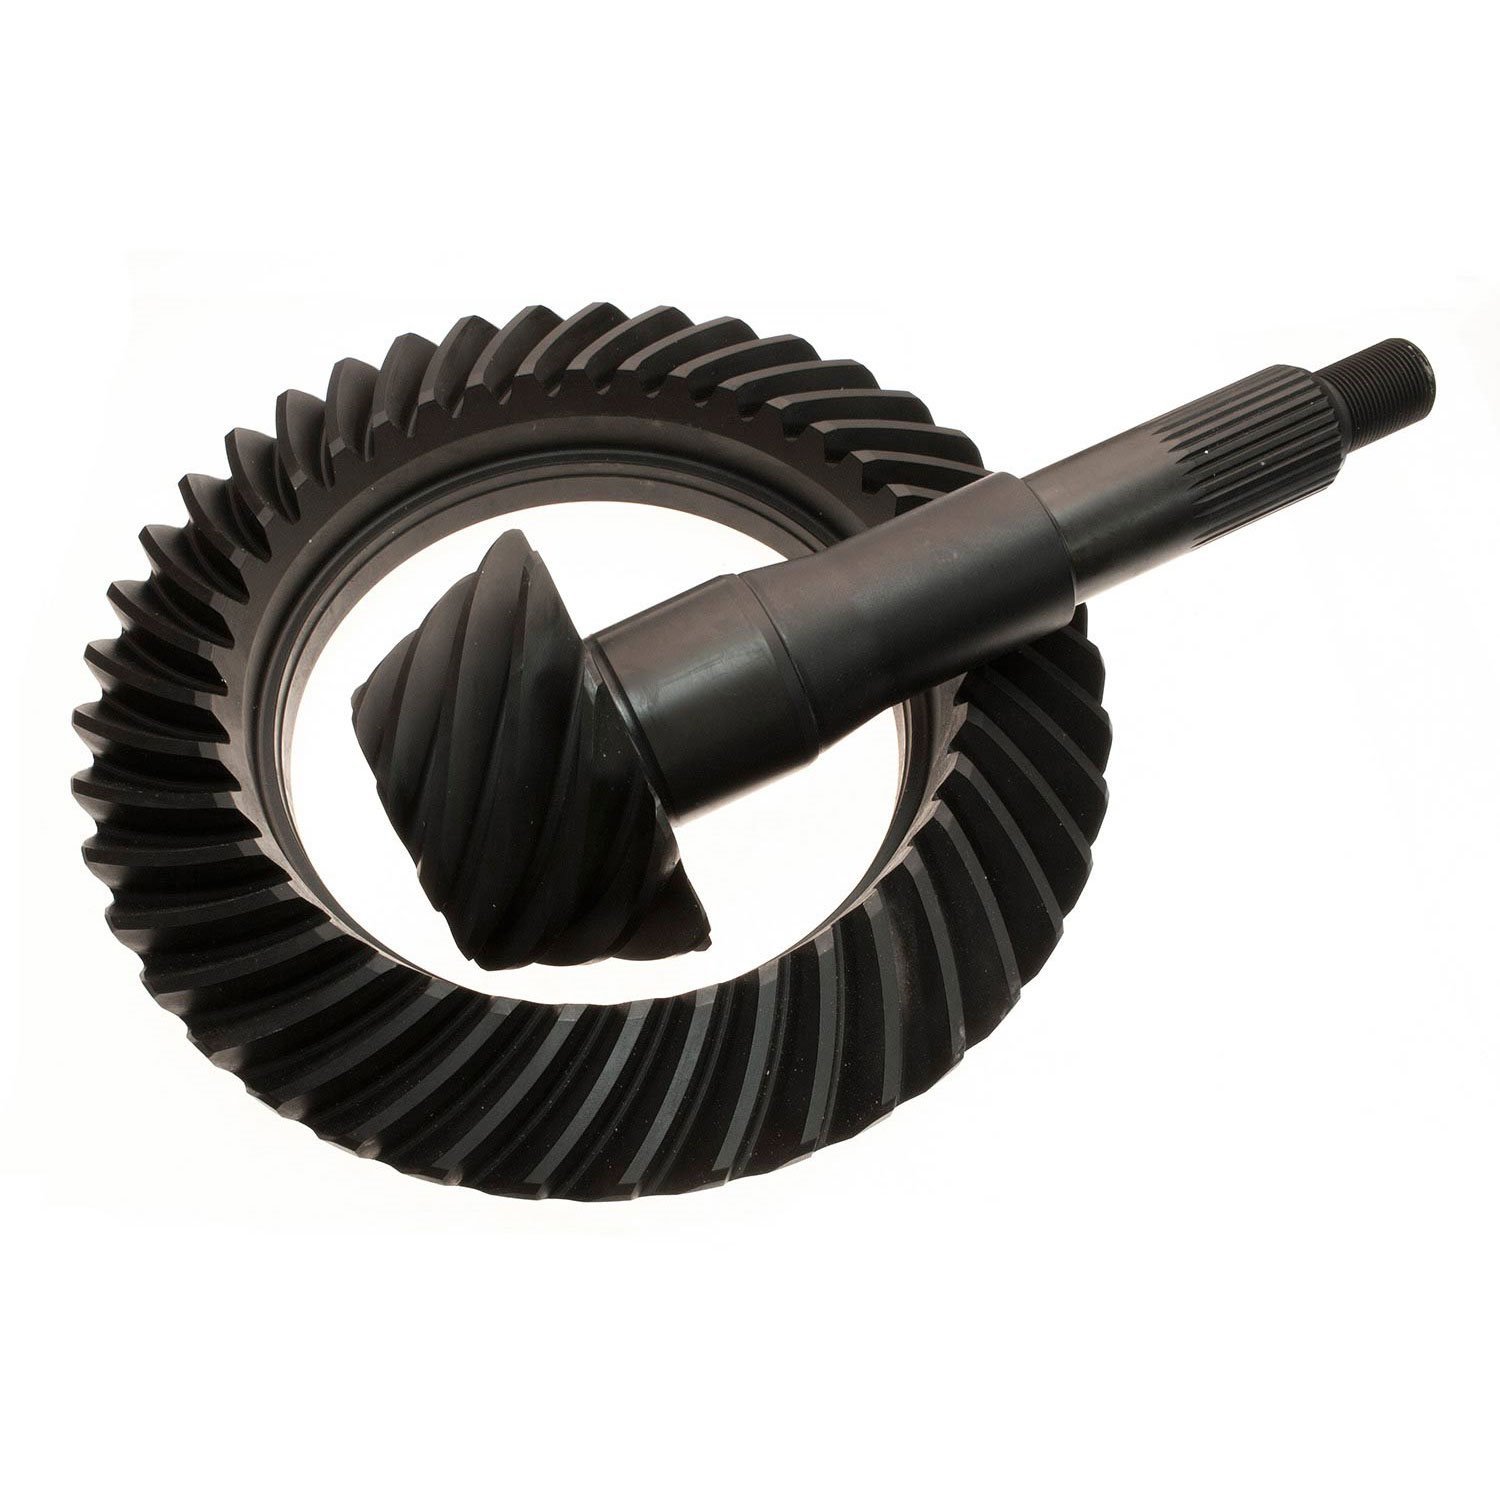 Ring & Pinion Gears Ford 10.25" 3.73 Ratio